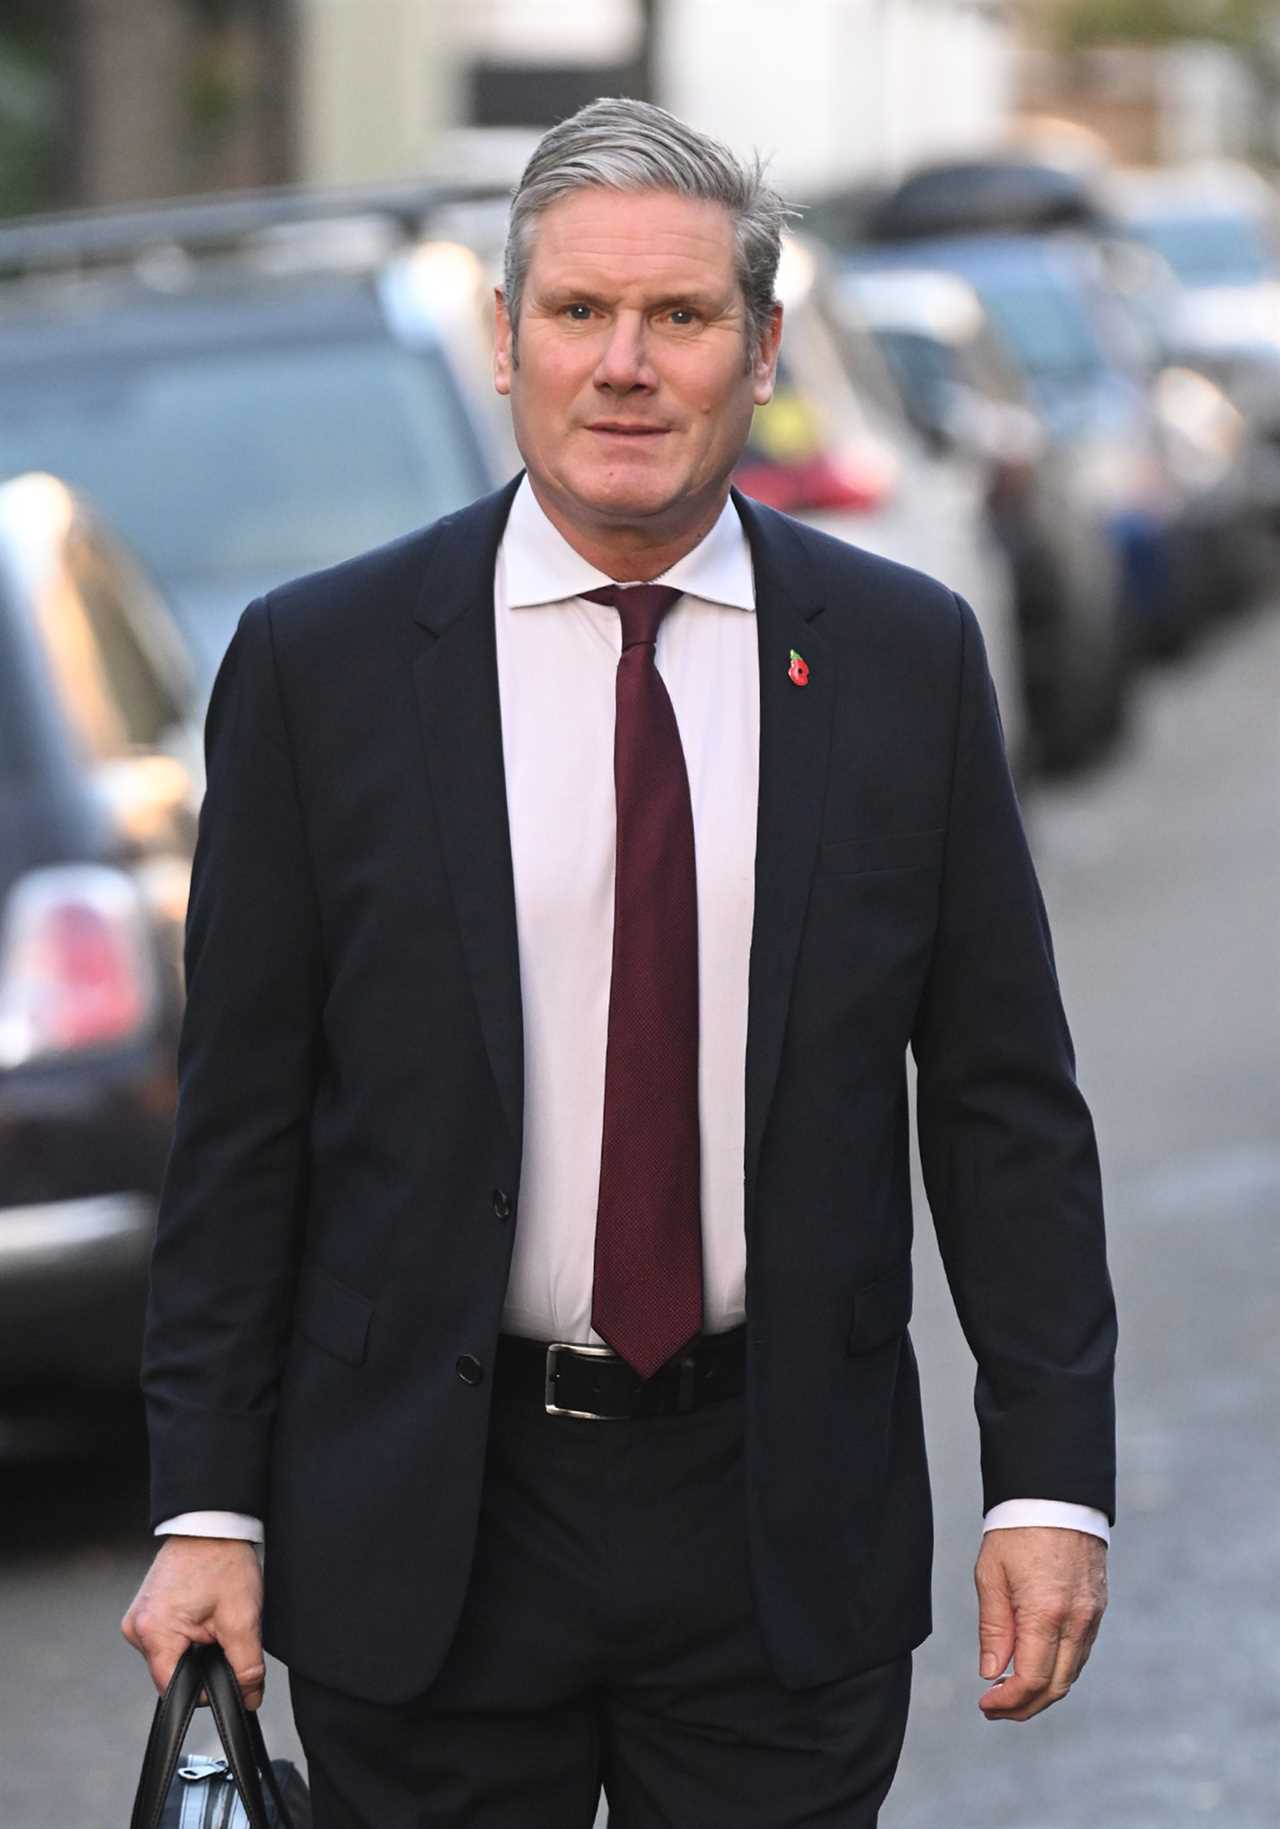 Keir Starmer warns big business there will be no ‘cheap migrant labour’ if he becomes PM